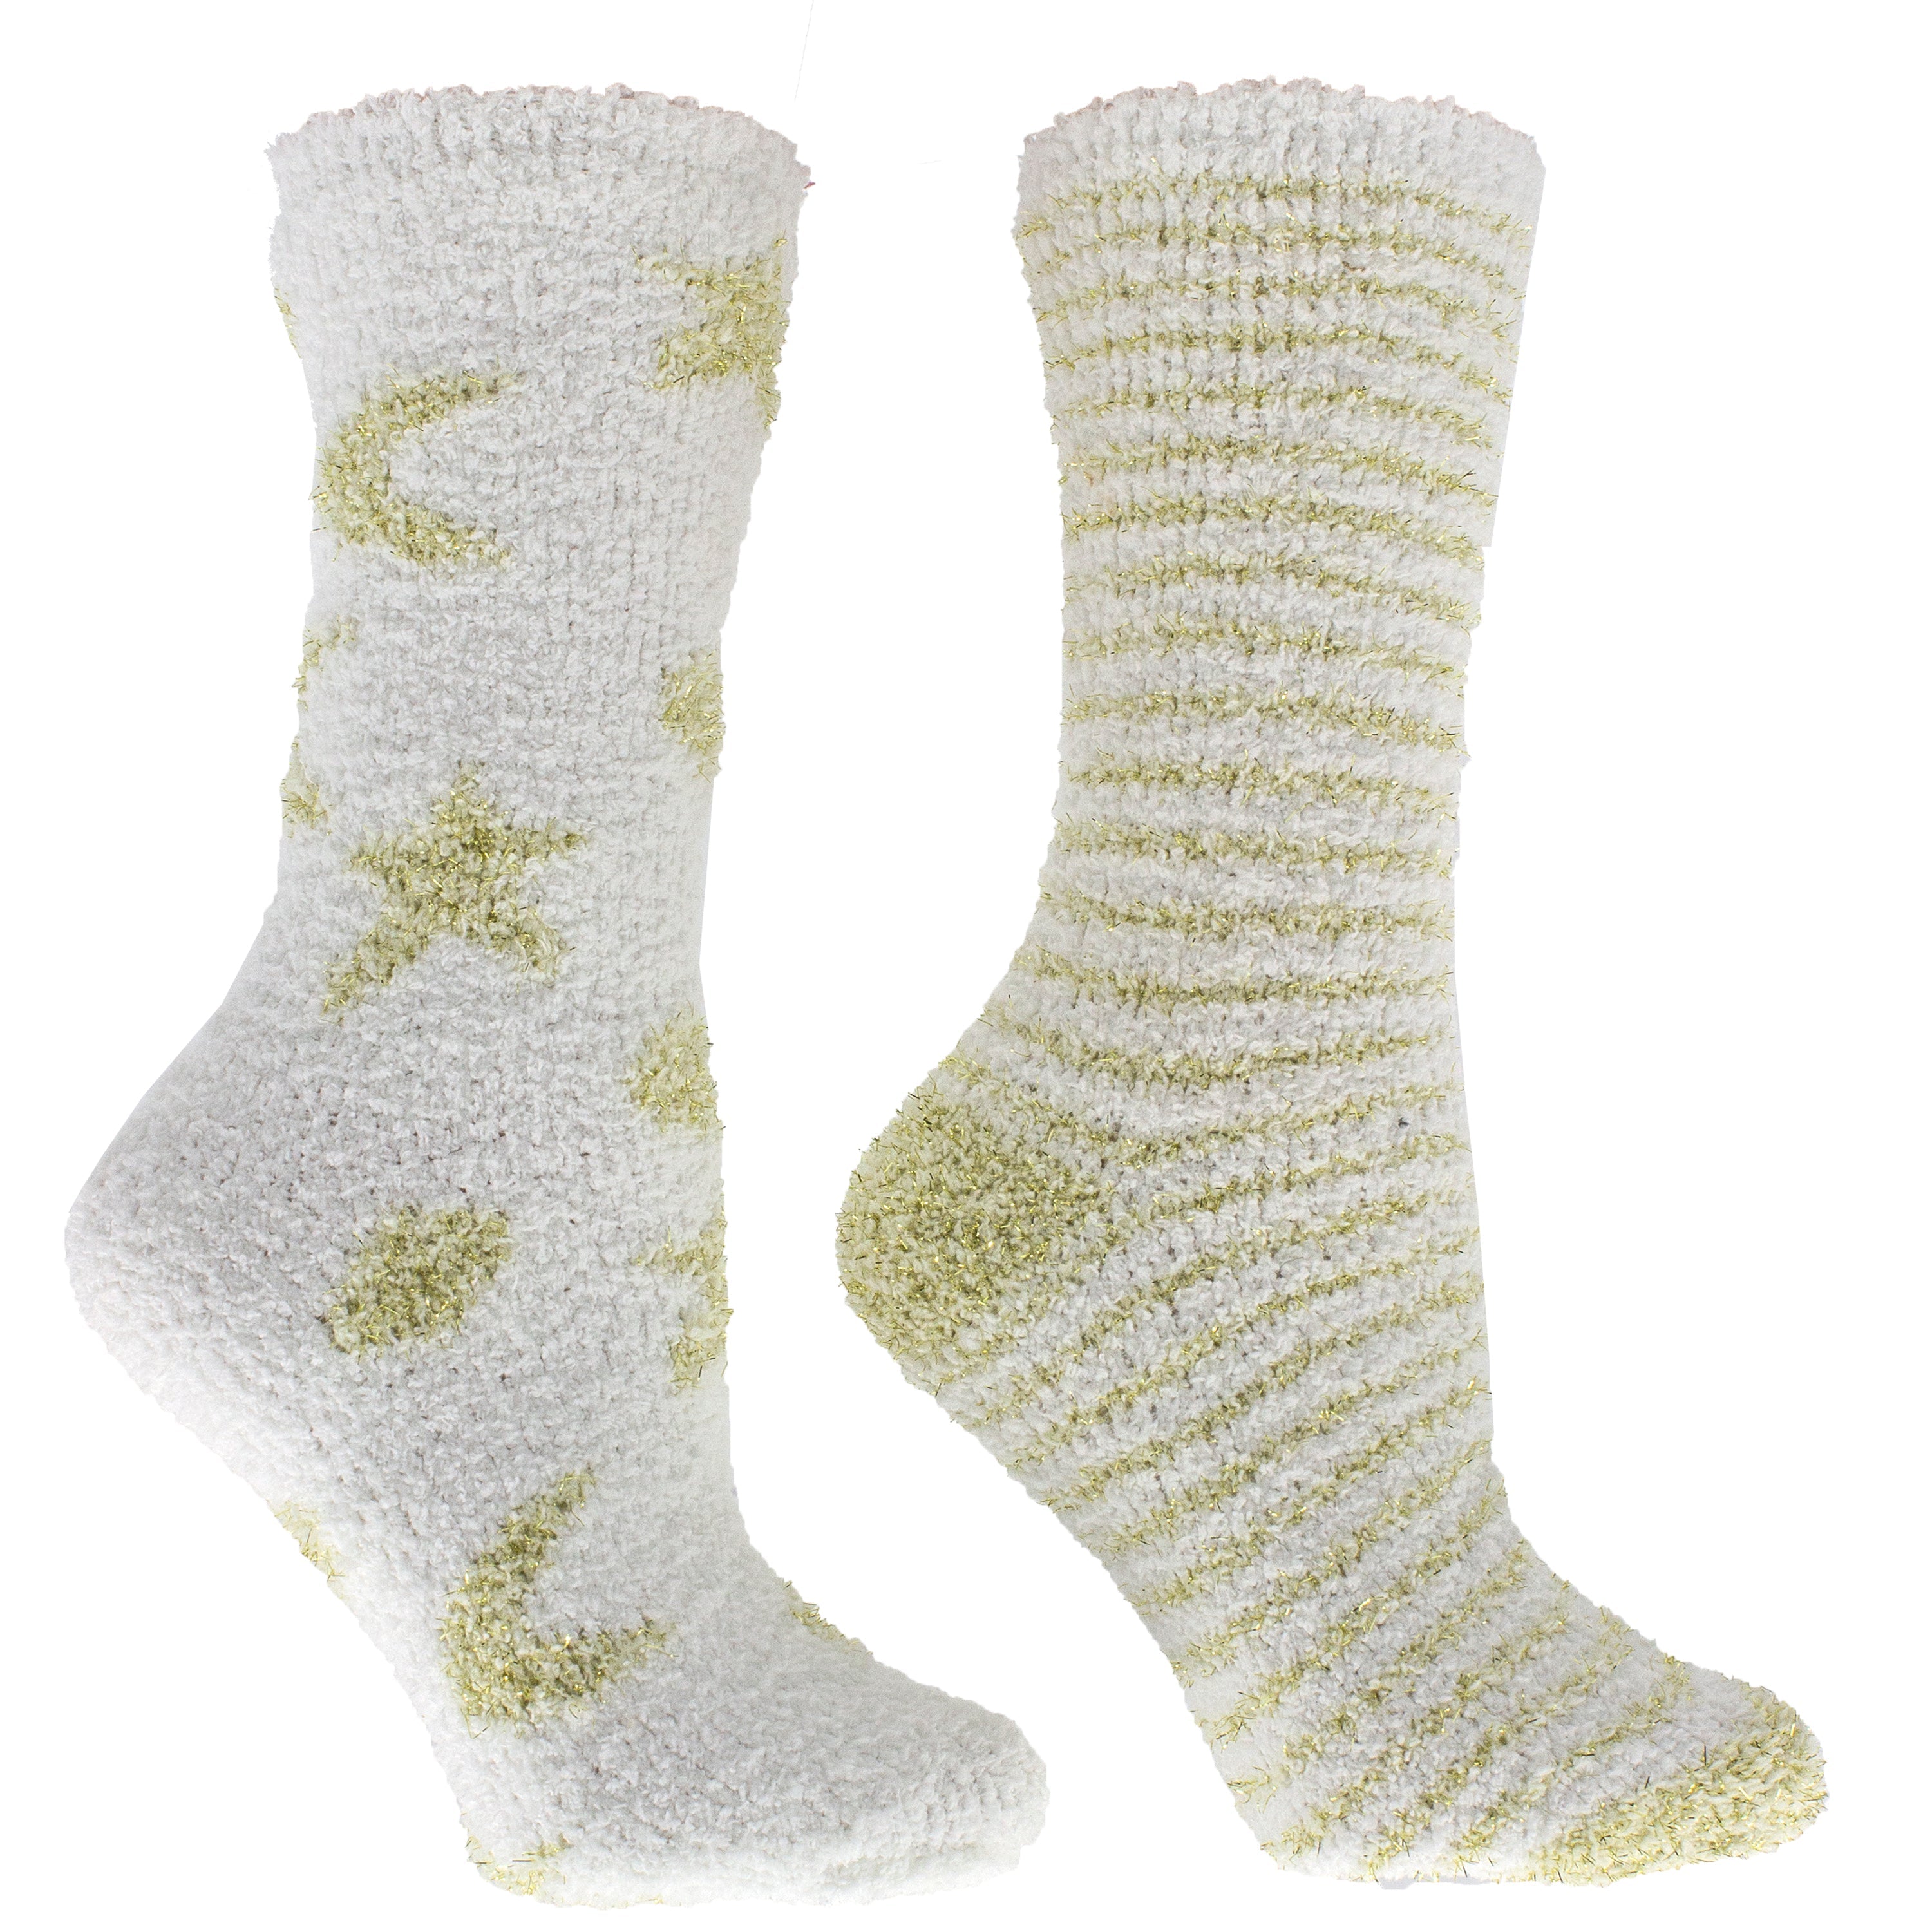 Natural Cozy Socks With Shea Butter, Therapeutic Cozy Socks